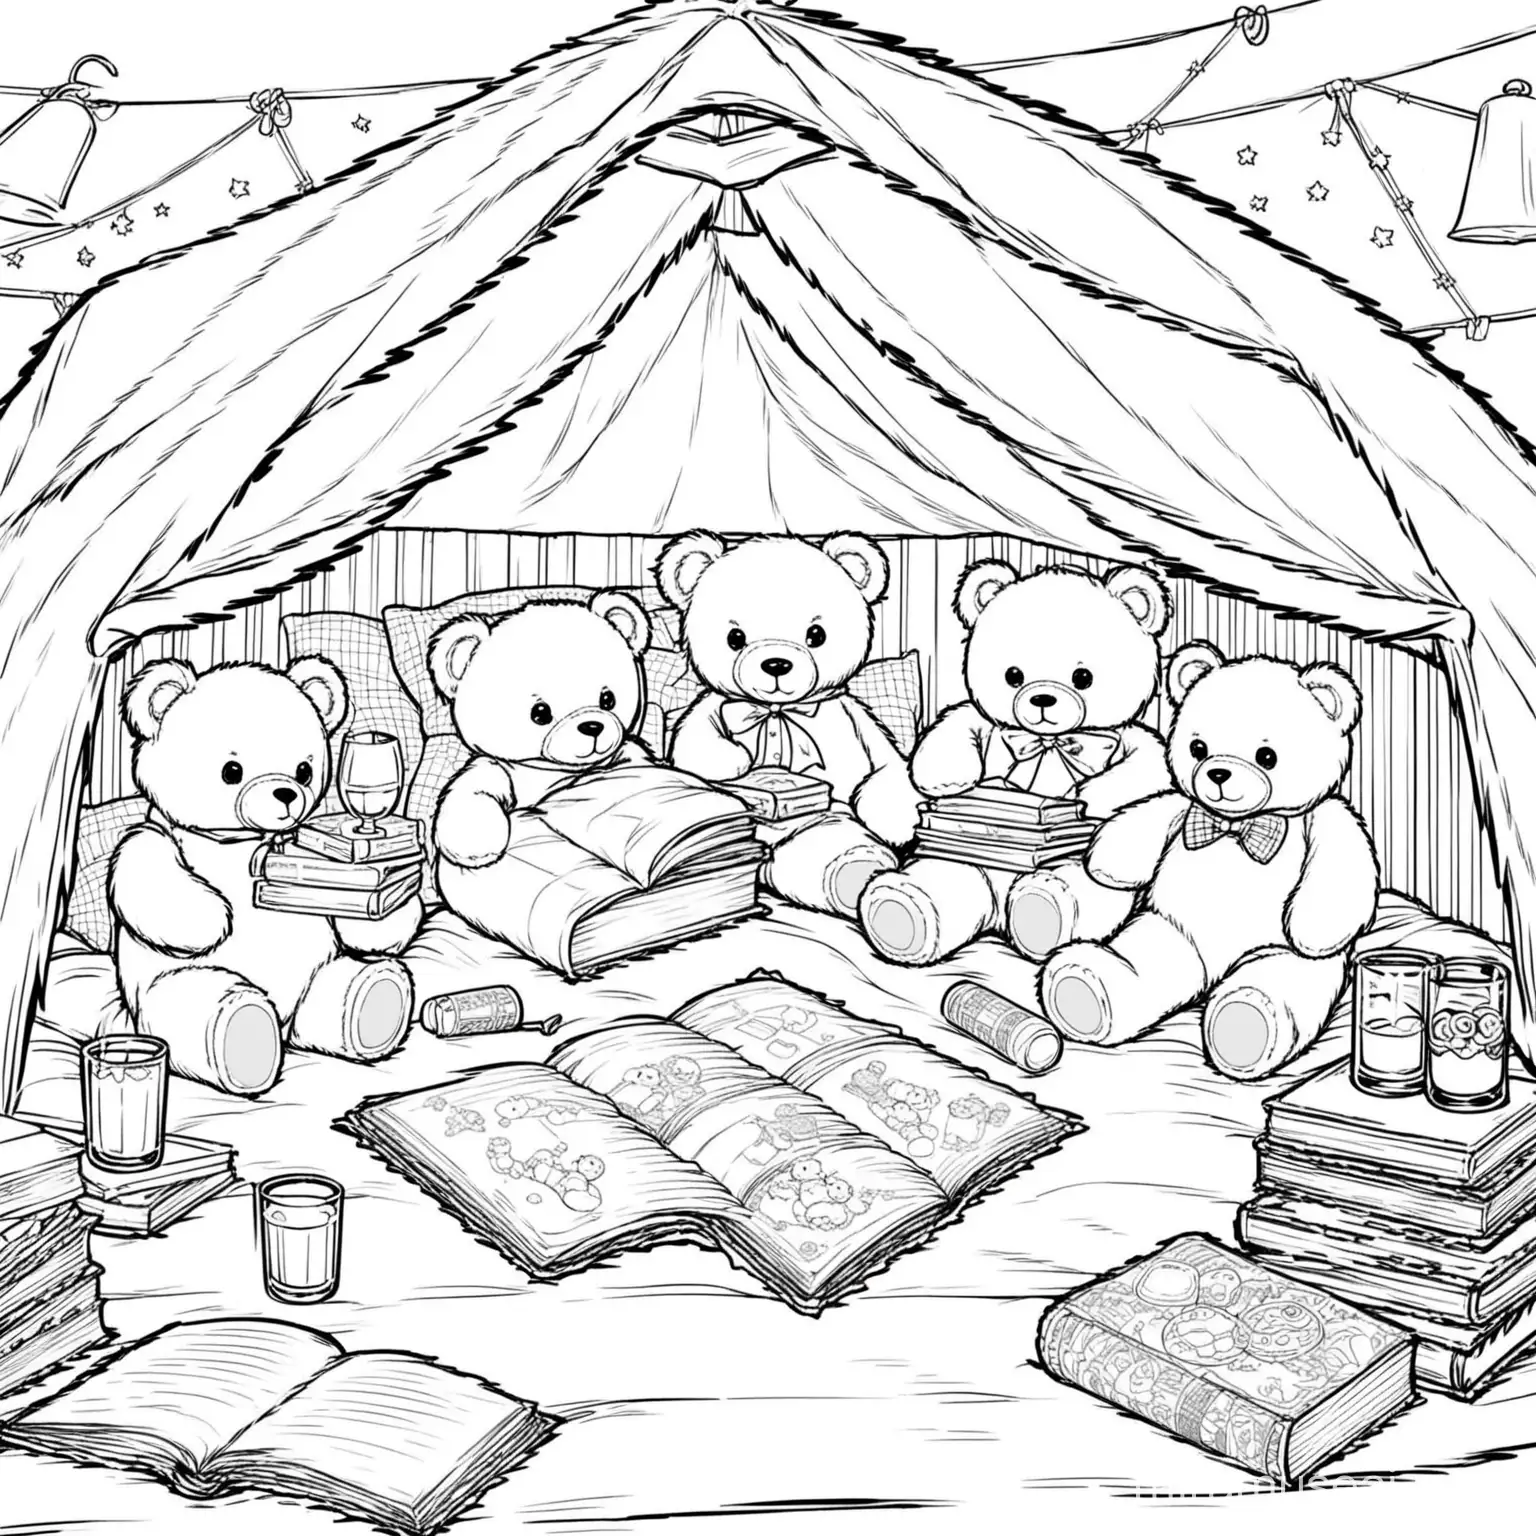 Teddy bears having a sleepover in a blanket fort. With drinks snacks com8c books and coloring books ready to be colored. 